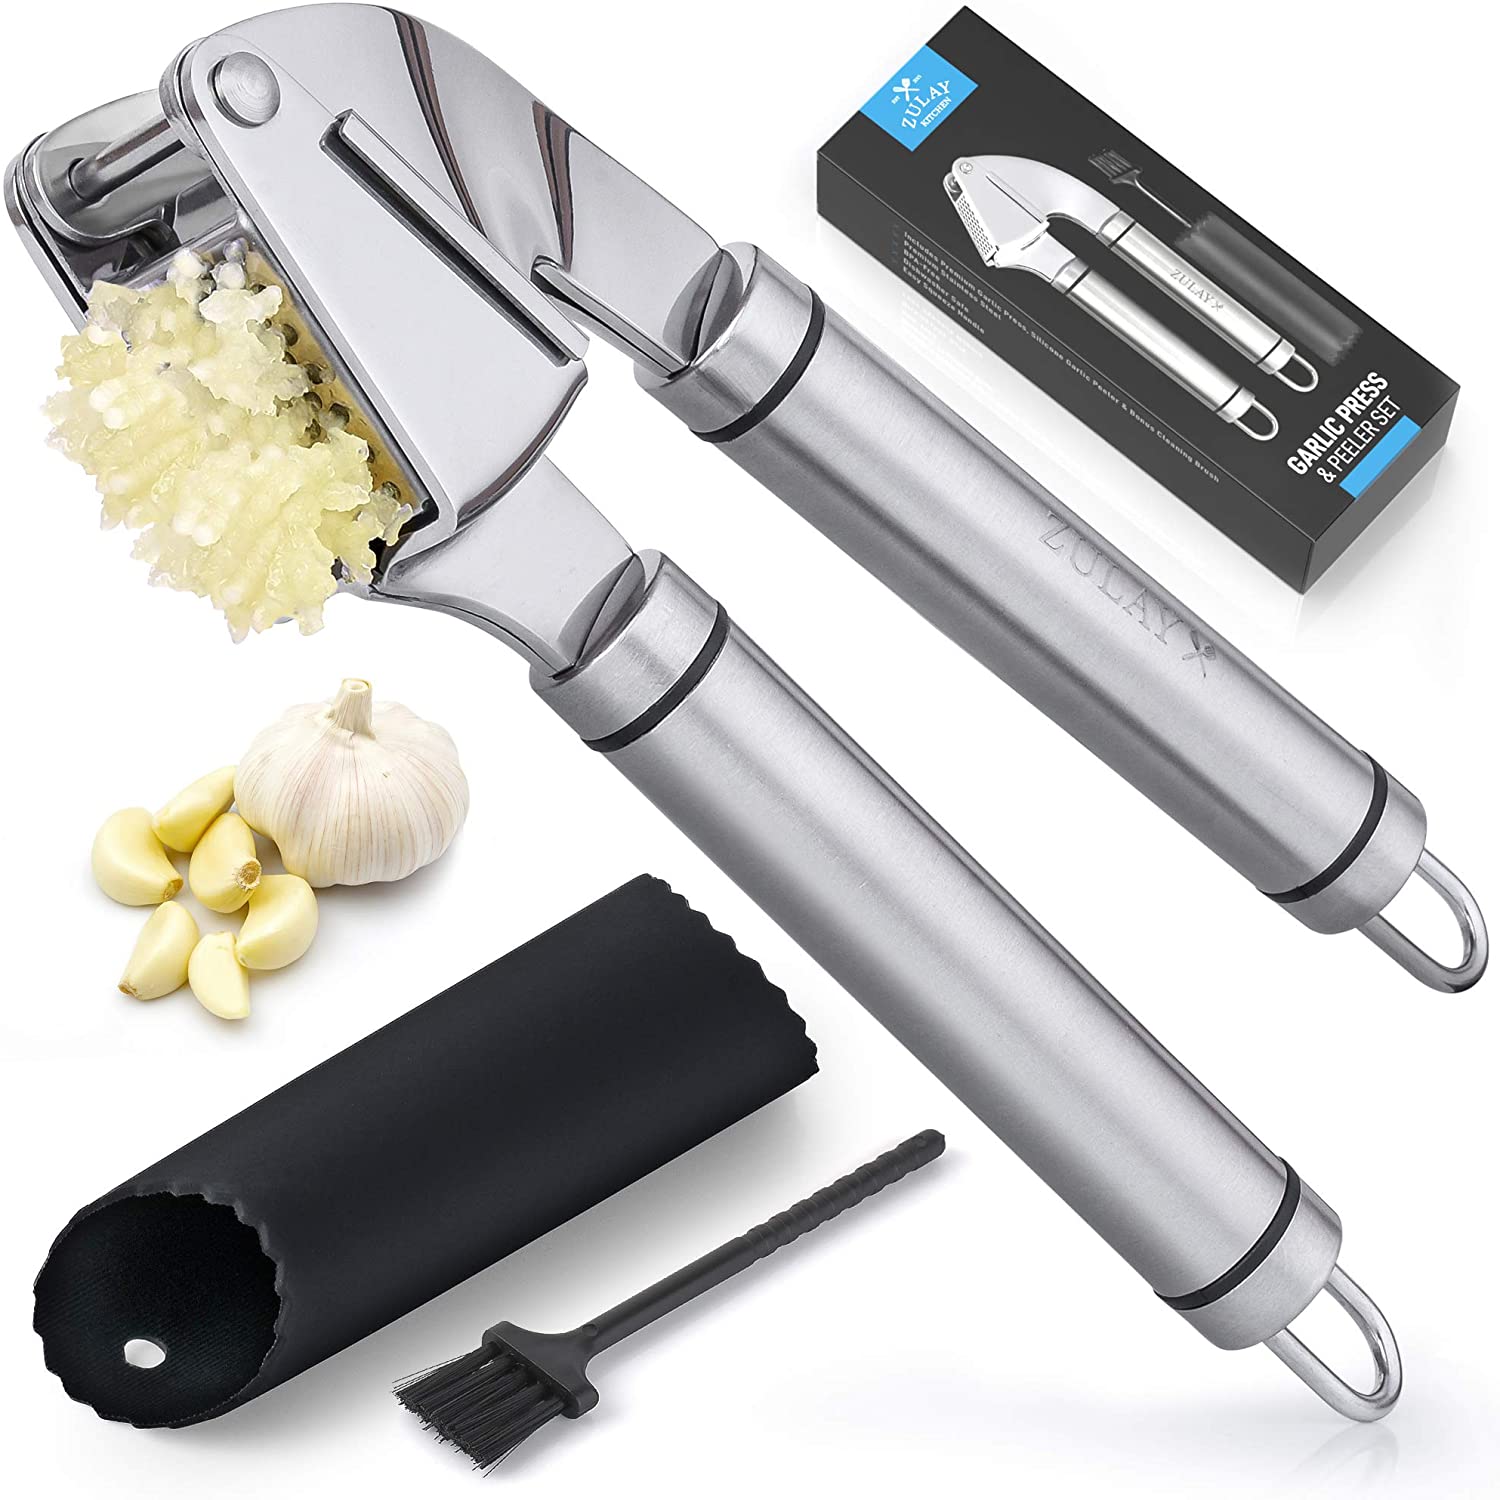 Premium Quality Garlic Mincer With Silicone Roller Peeler - Zulay KitchenZulay Kitchen